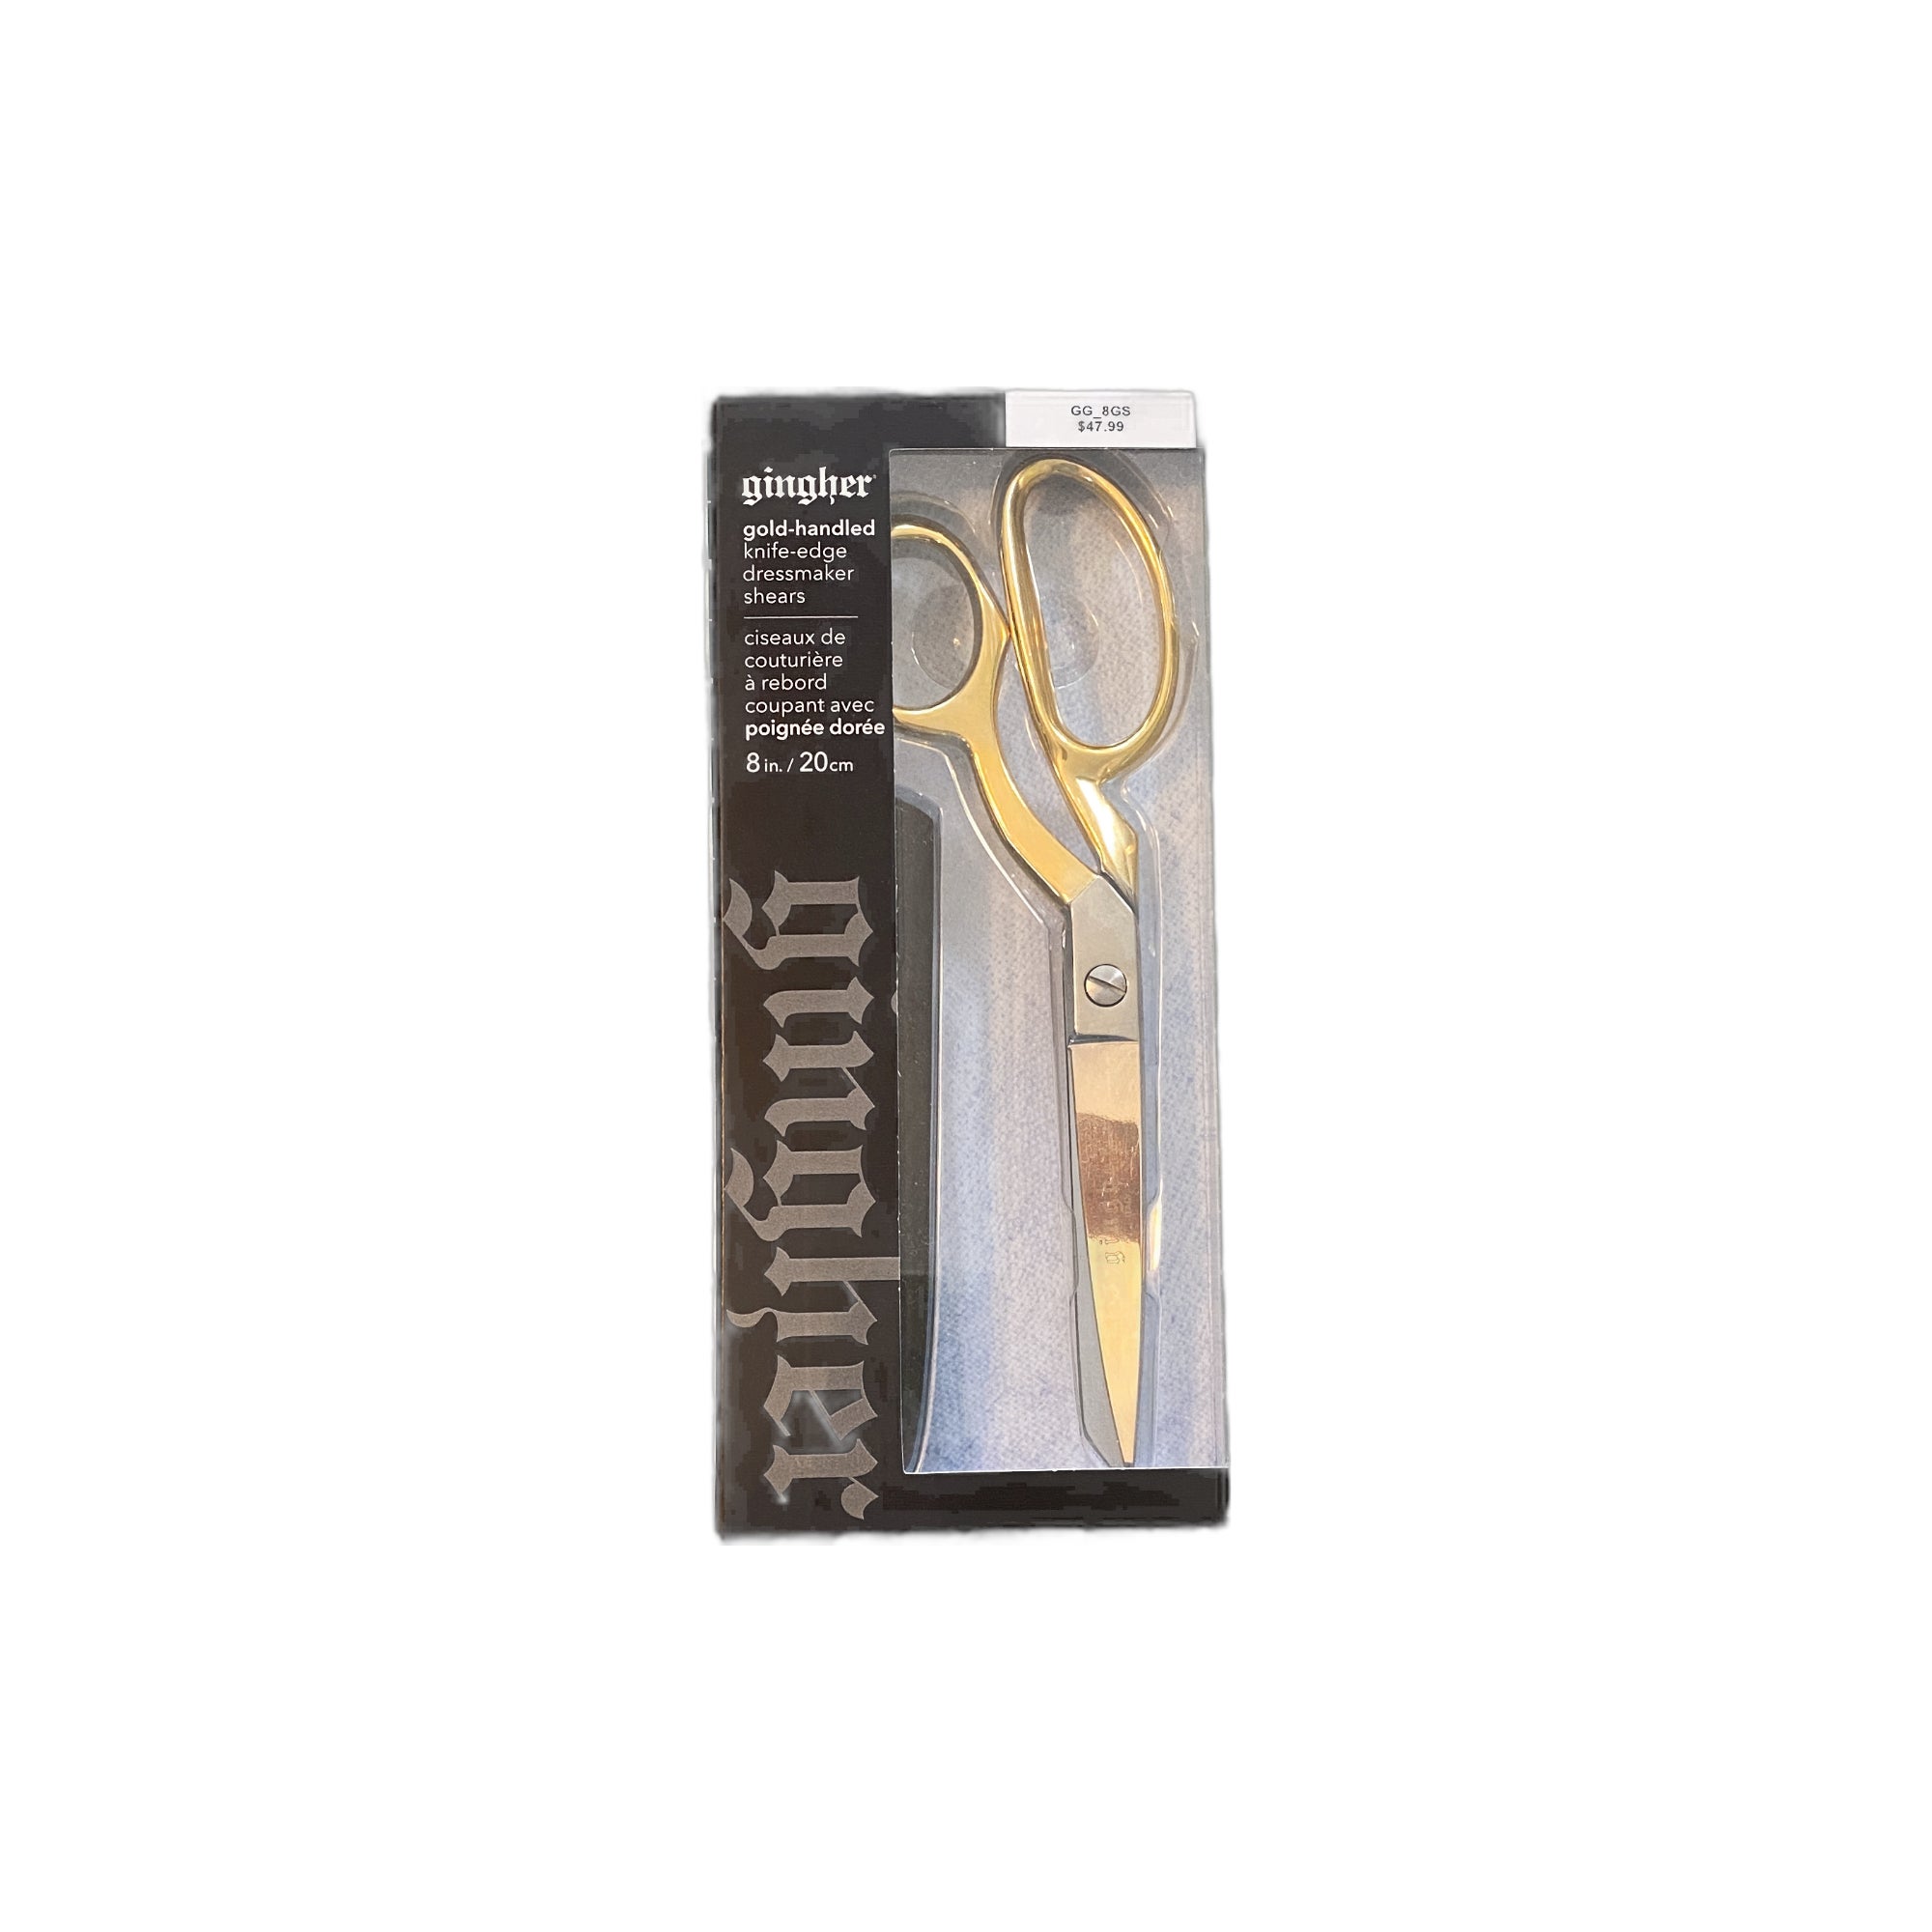 Gingher 5 knife-edge sewing scissors – Square in a Square